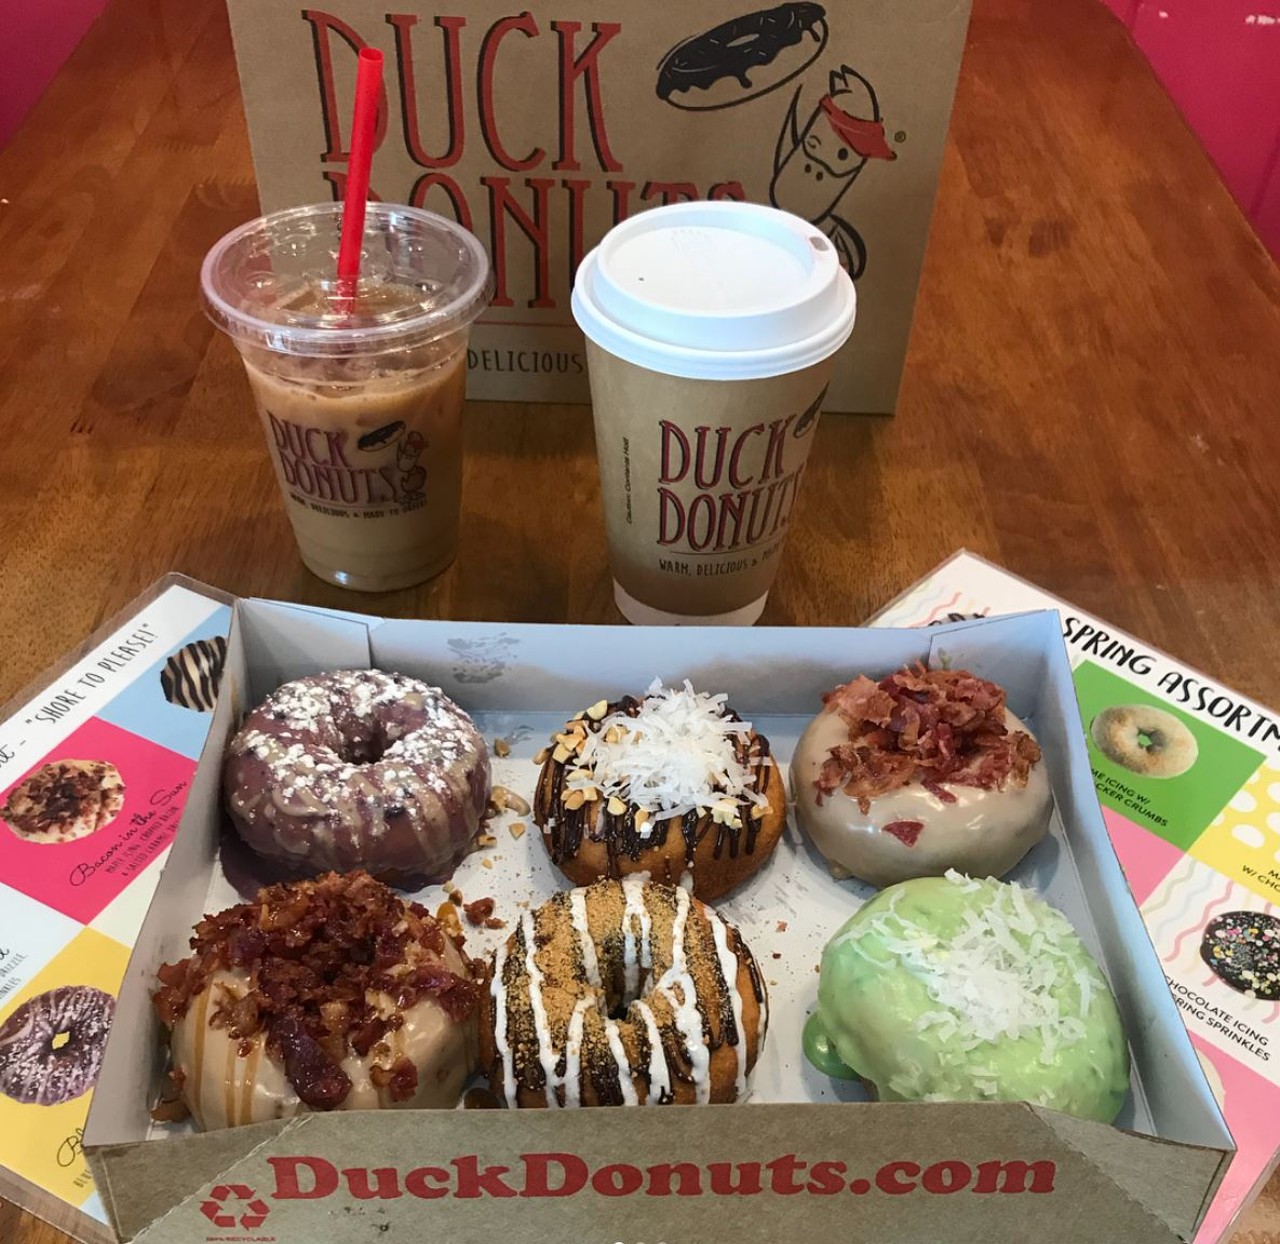 Duck Donuts
11703 Huebner Rd, (210) 476-5500, duckdonuts.com
Duck Donuts opened in late January with made-to-order donuts and customizable toppings.
Photo via Instagram / crystalcastillo.14